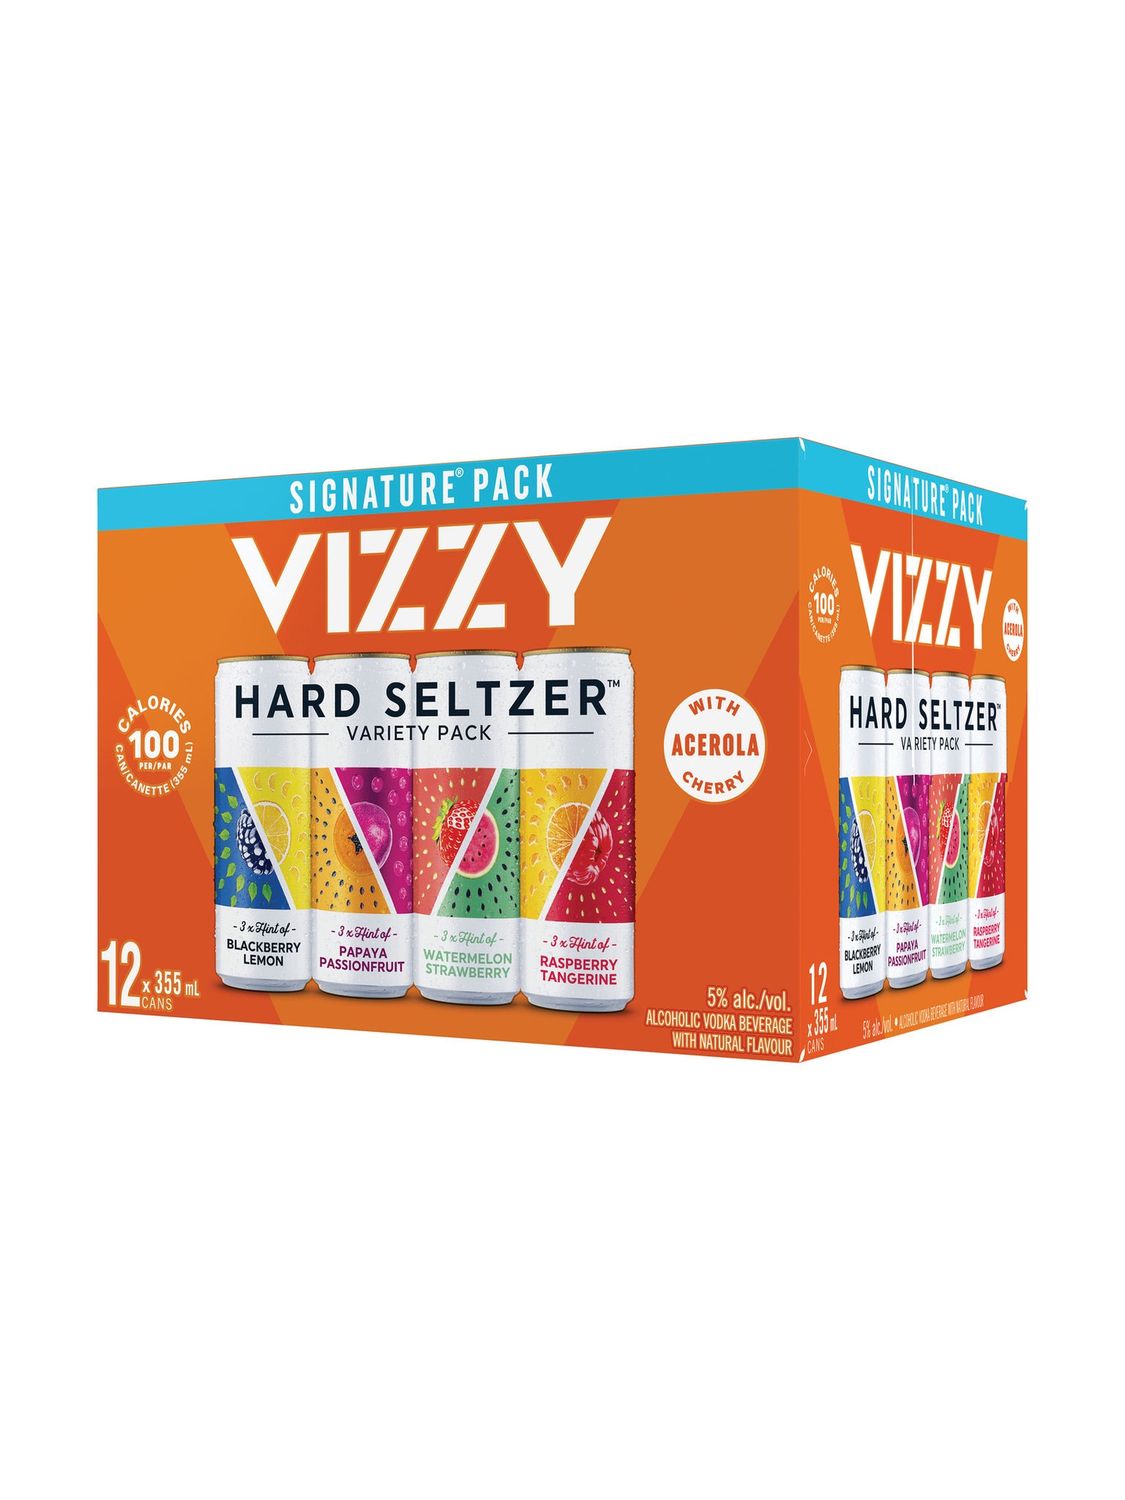 VIZZY MIXER PACK, Size: 12 Cans